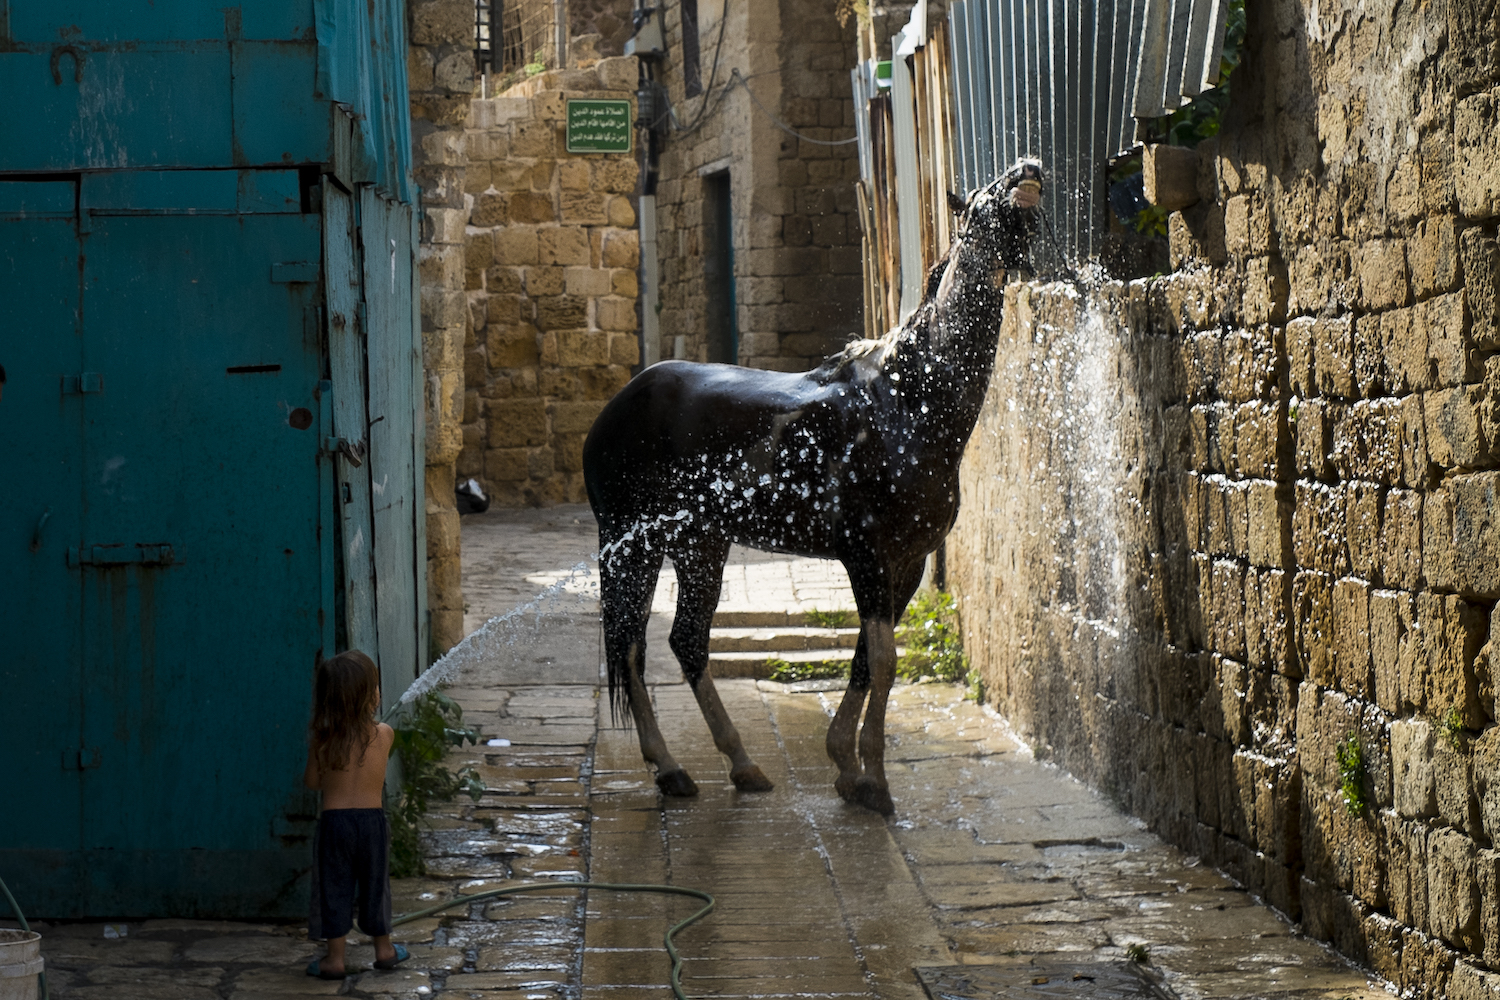 Street photography workshops in Israel and Barcelona 2022